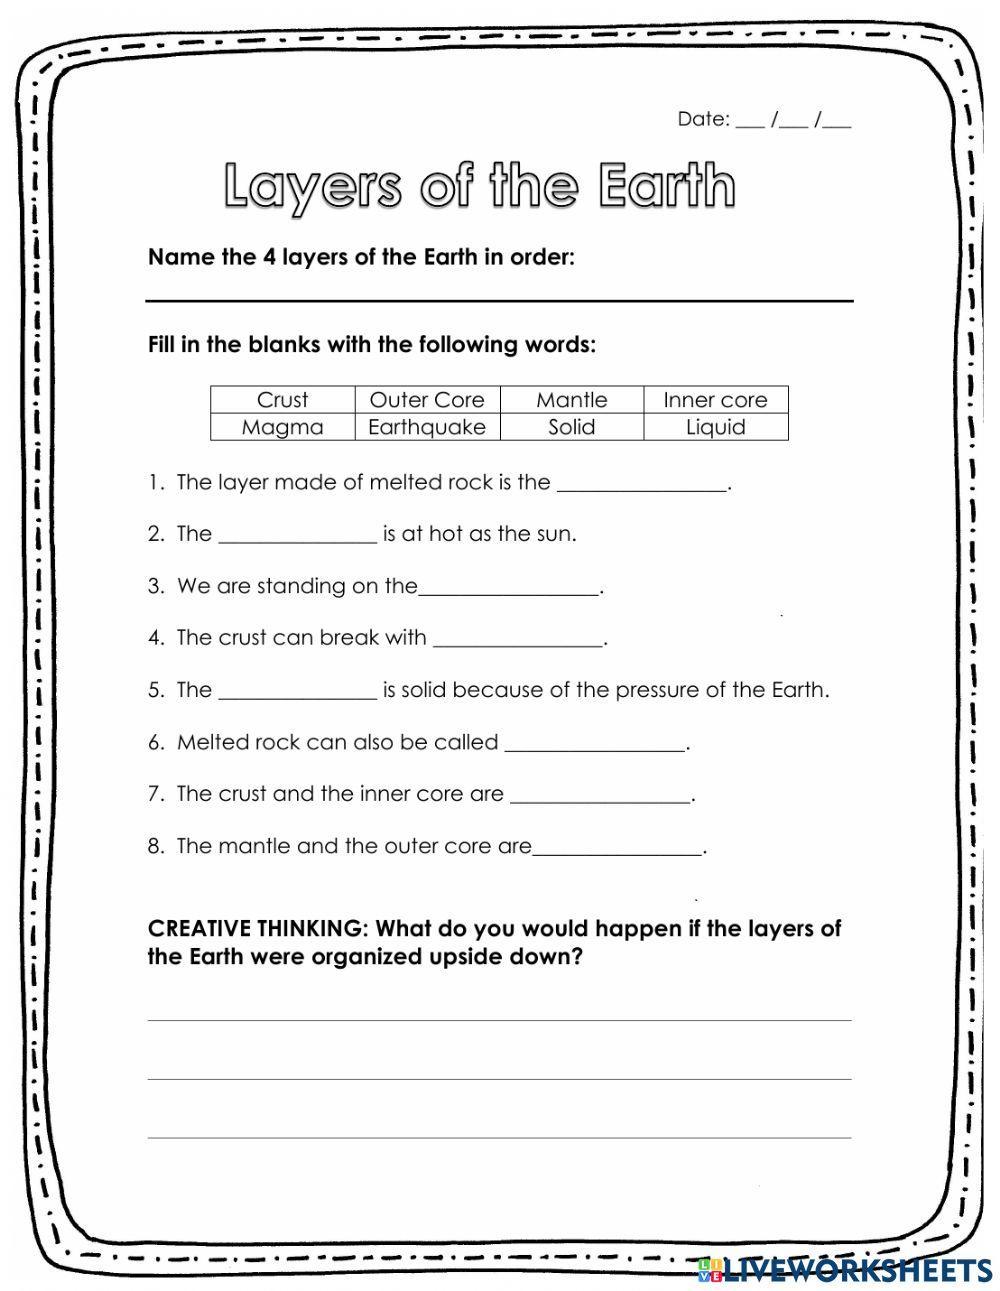 4 layers of the Earth